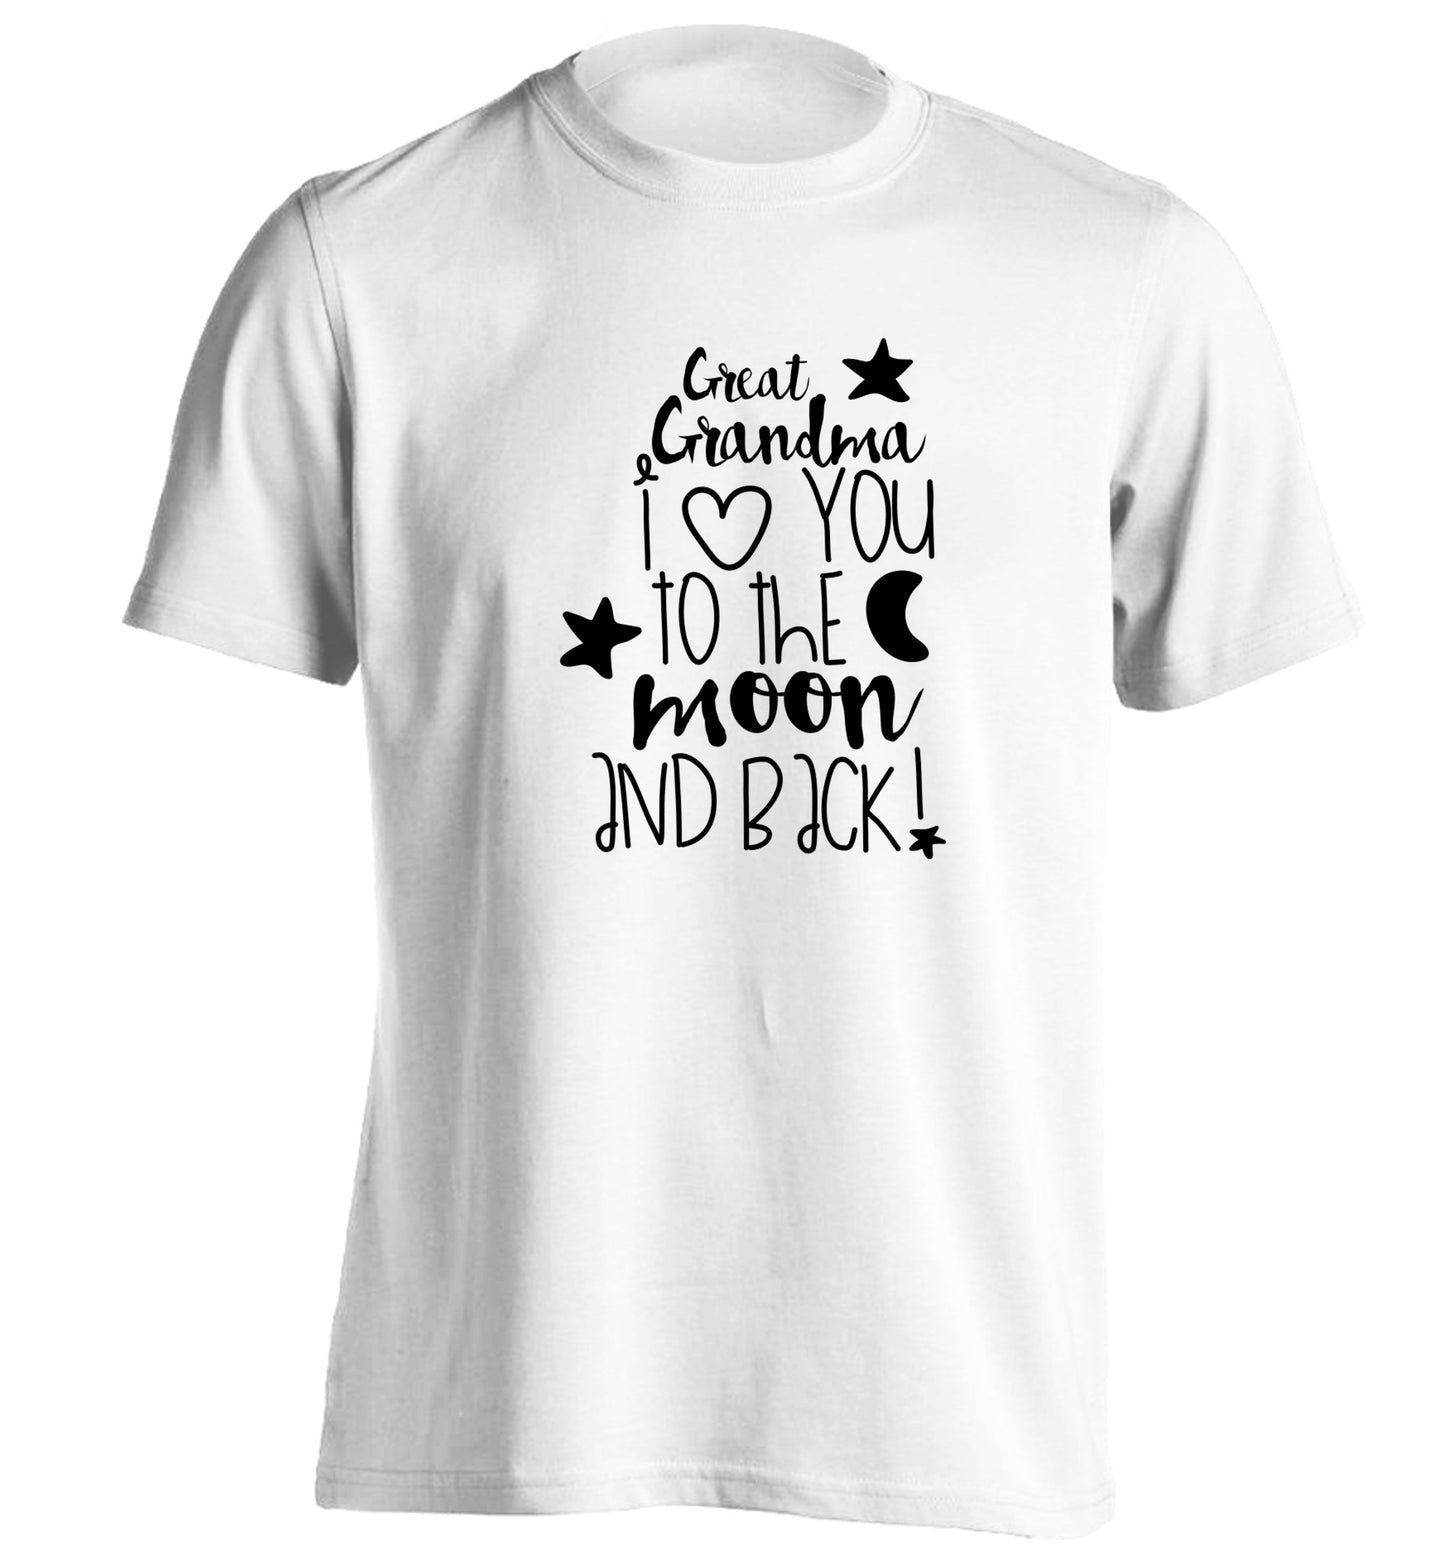 Great Grandma I love you to the moon and back adults unisex white Tshirt 2XL